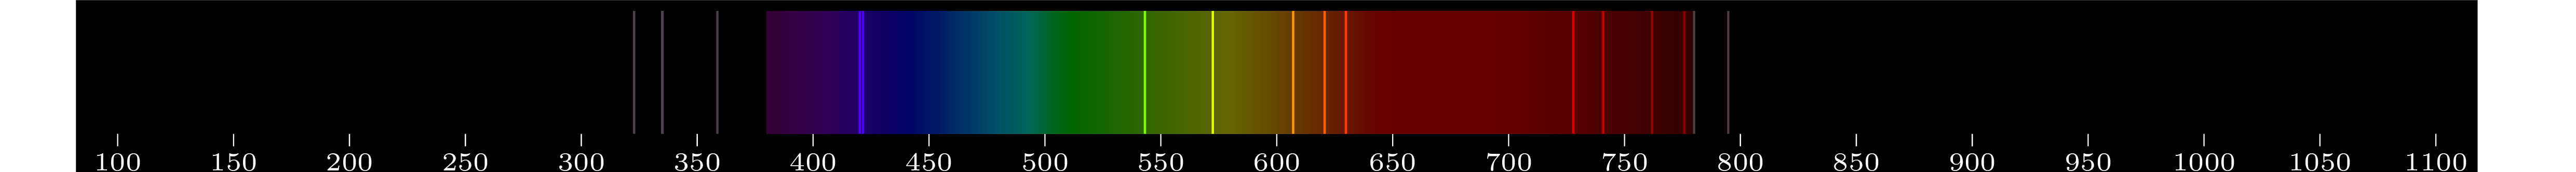 emmision spectra of element Rb